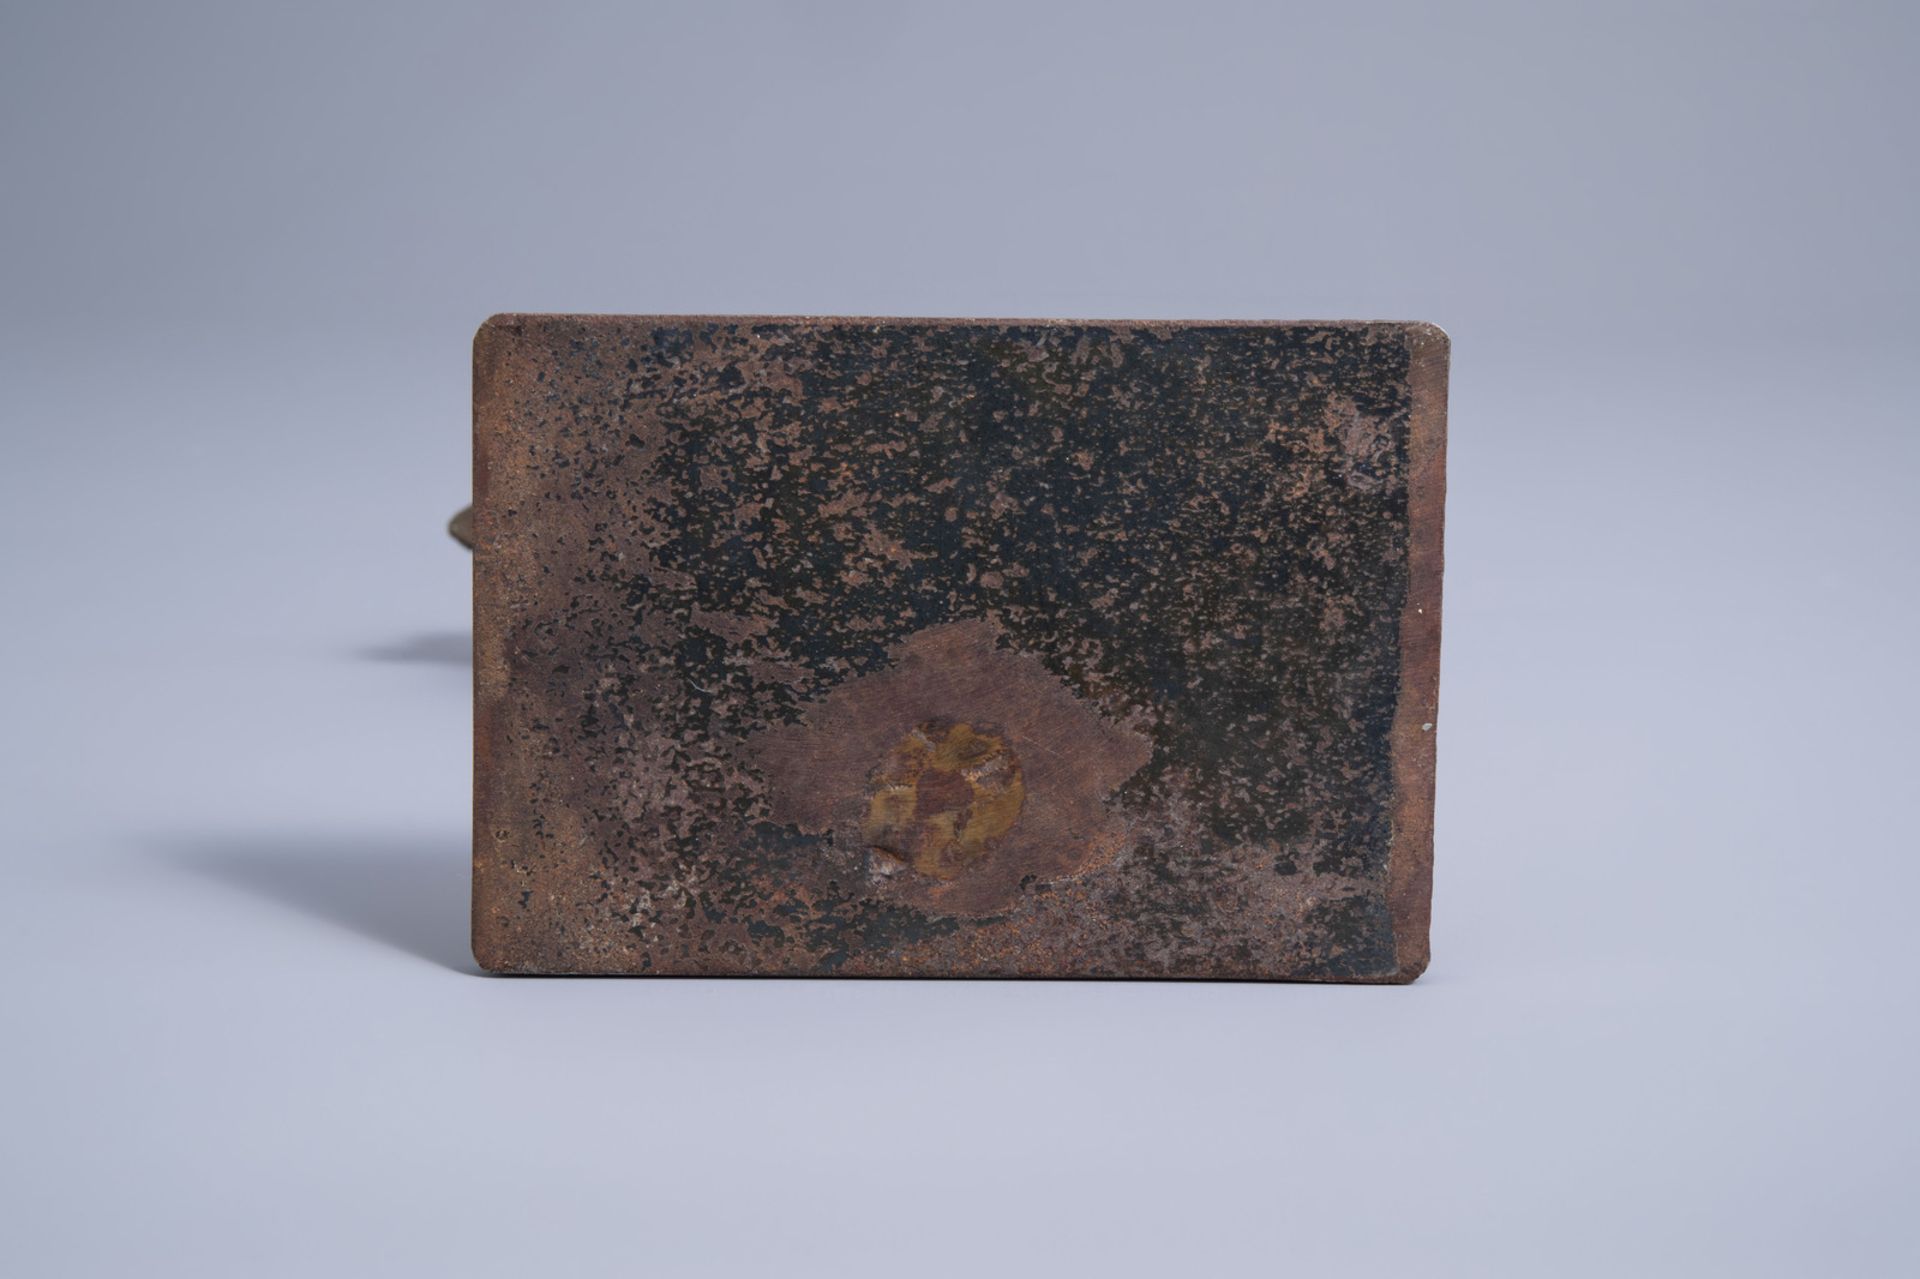 Patrick Chappert-Gaujal (1959): Untitled, polychrome patinated bronze, dated 2001 - Image 7 of 8